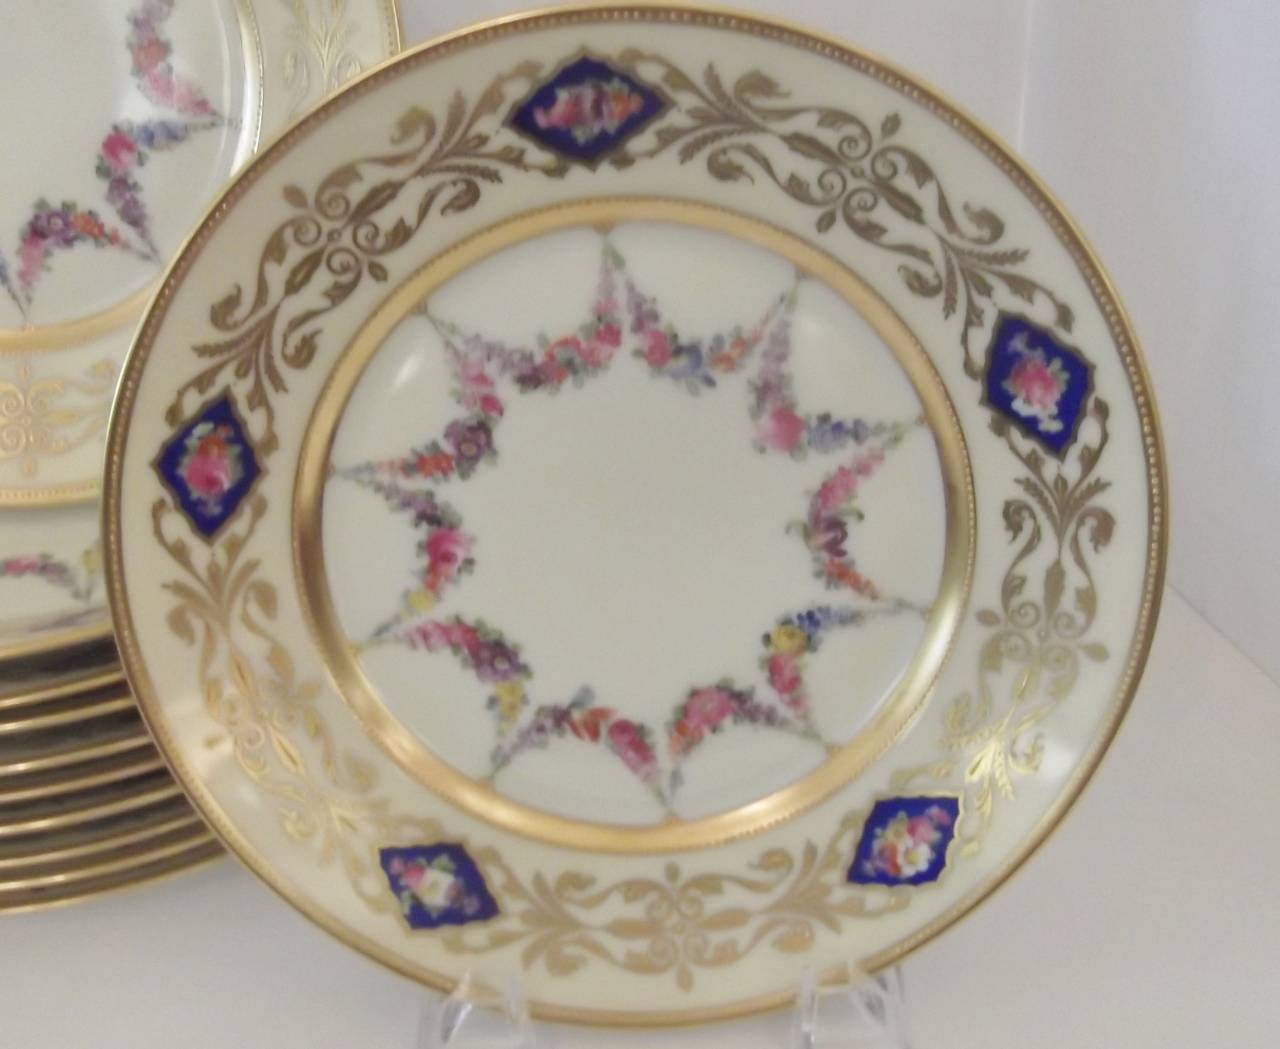 Twelve delicately painted accent plates made by Dresden.
Raised gilt borders with cobalt cartouches with floral centers. Inner and outer gold bands with raised beading with hand painted garlands of flowers in the centers. Image 8 and 9 show these